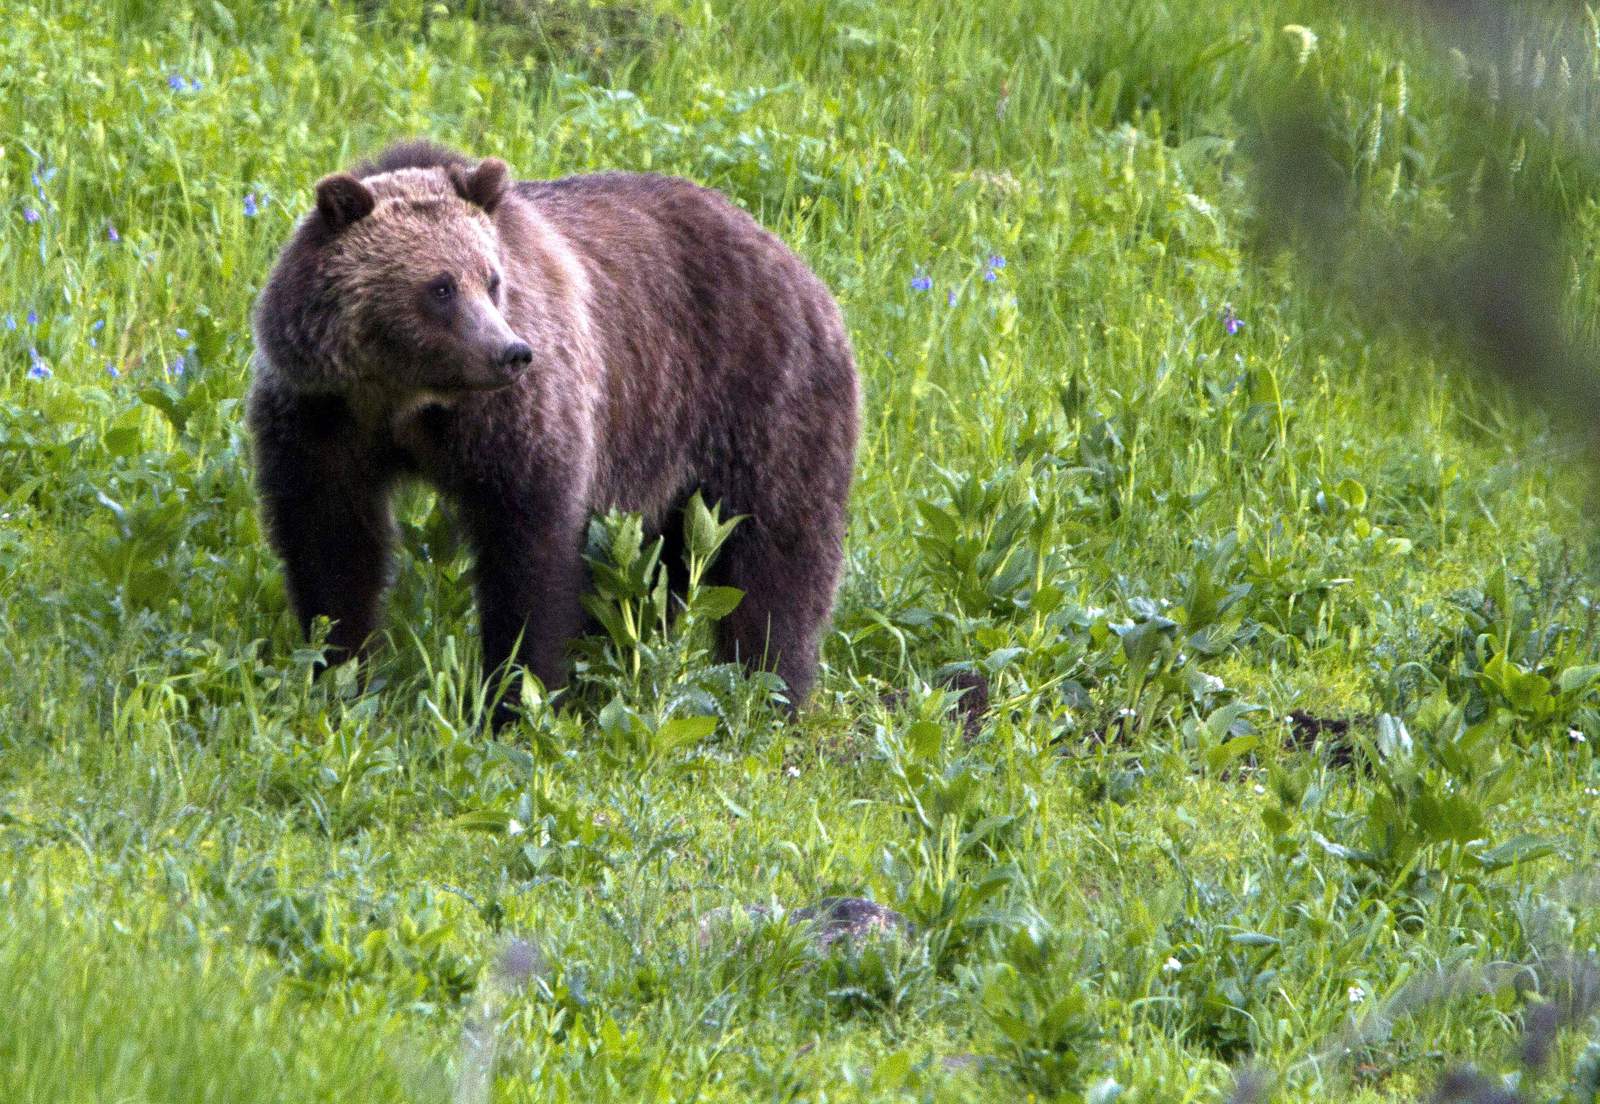 $2K reward offered in Wyoming grizzly bear killing case